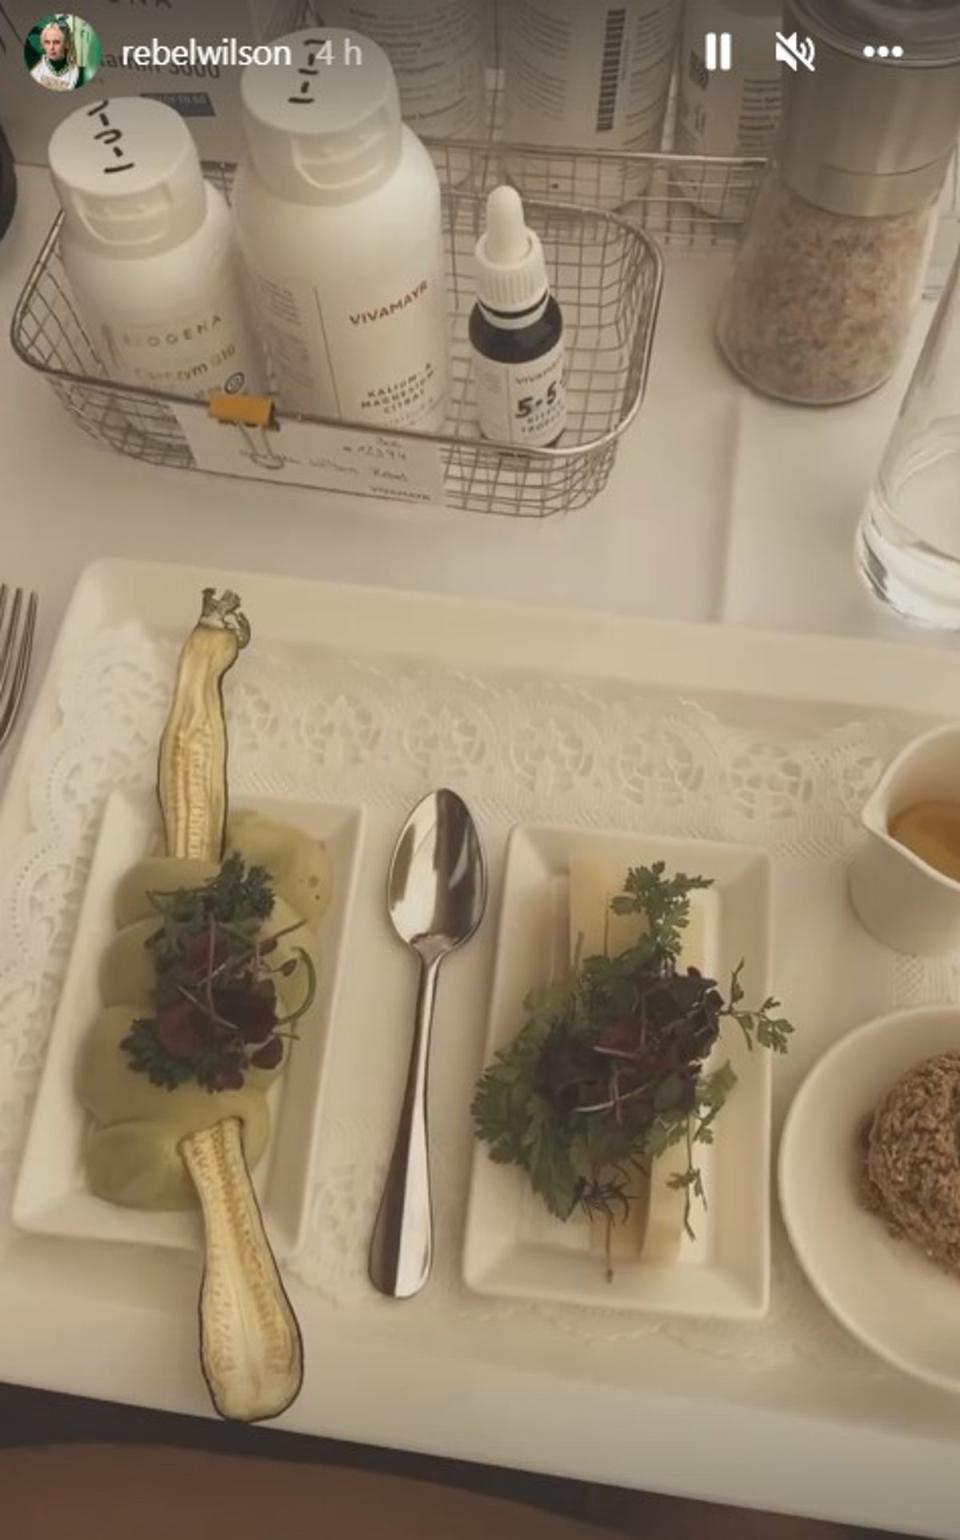 The actress showcased her breakfast, avocado mousse, cheese and an oat roll, at the luxurious wellness resort (Instagram/Rebel Wilson)